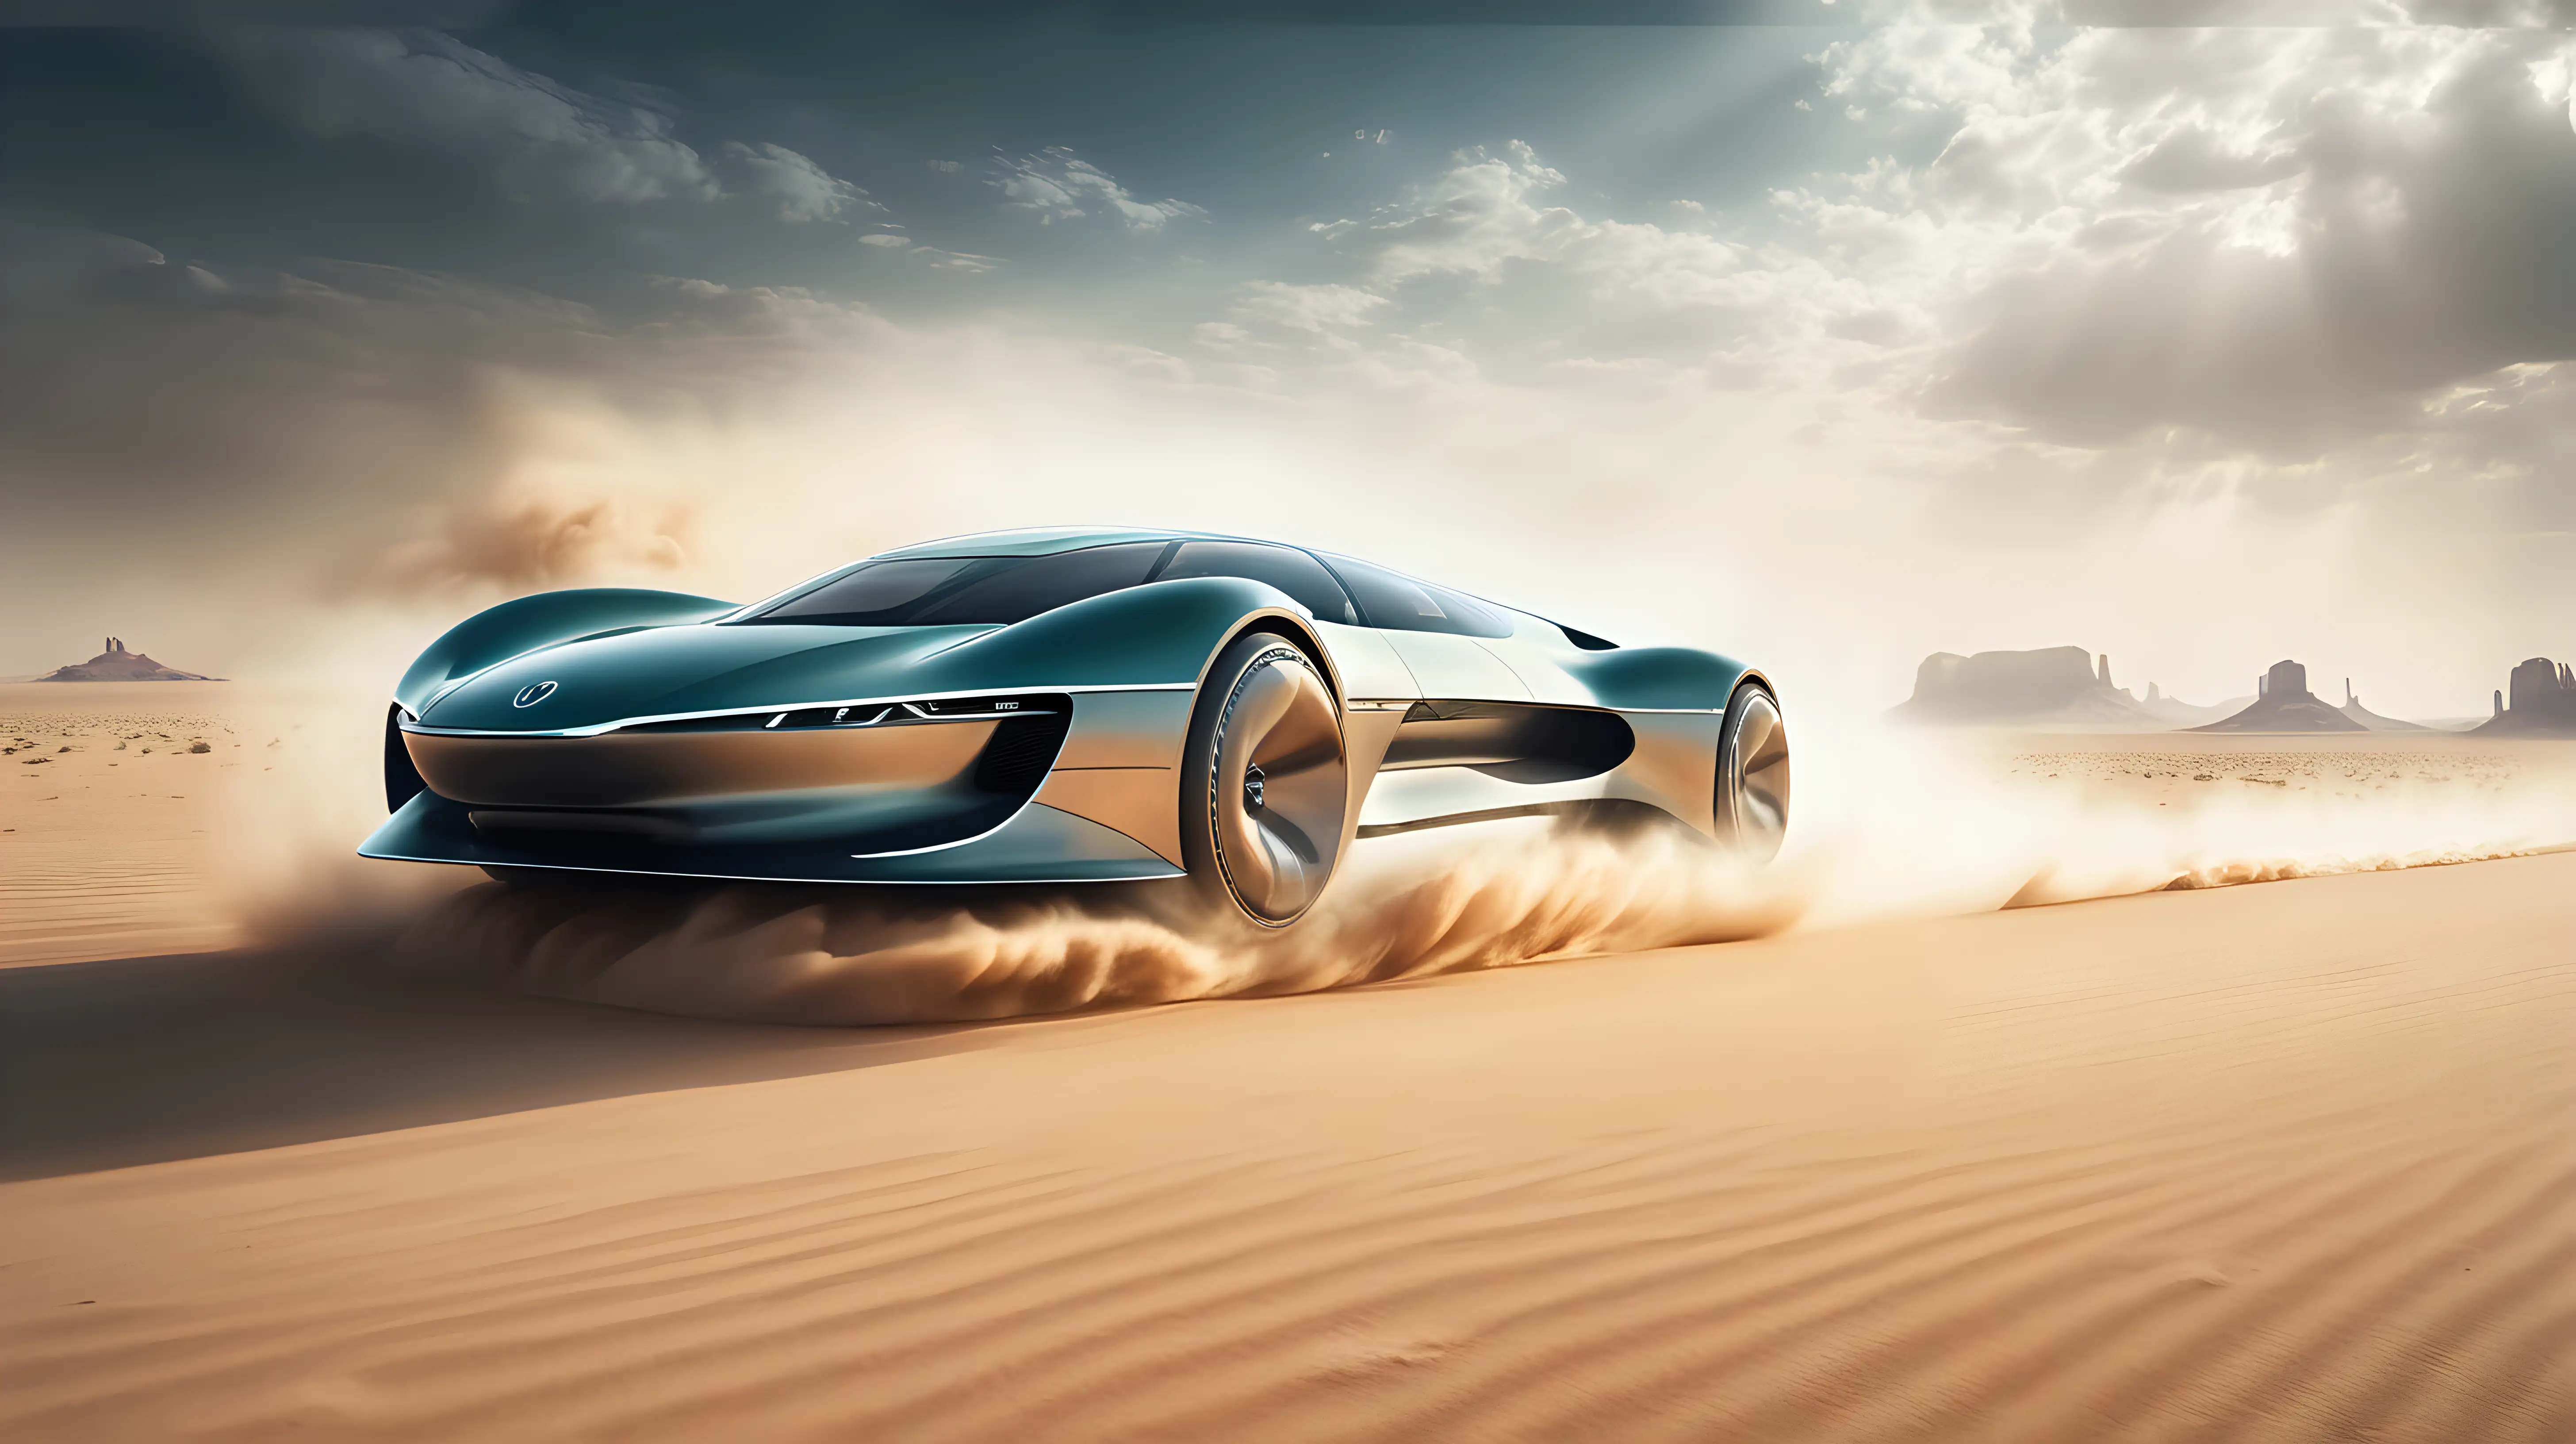 An electrifying image of a futuristic car speeding across a desert landscape, kicking up clouds of dust behind it as it races towards the horizon, creating a dramatic wallpaper.